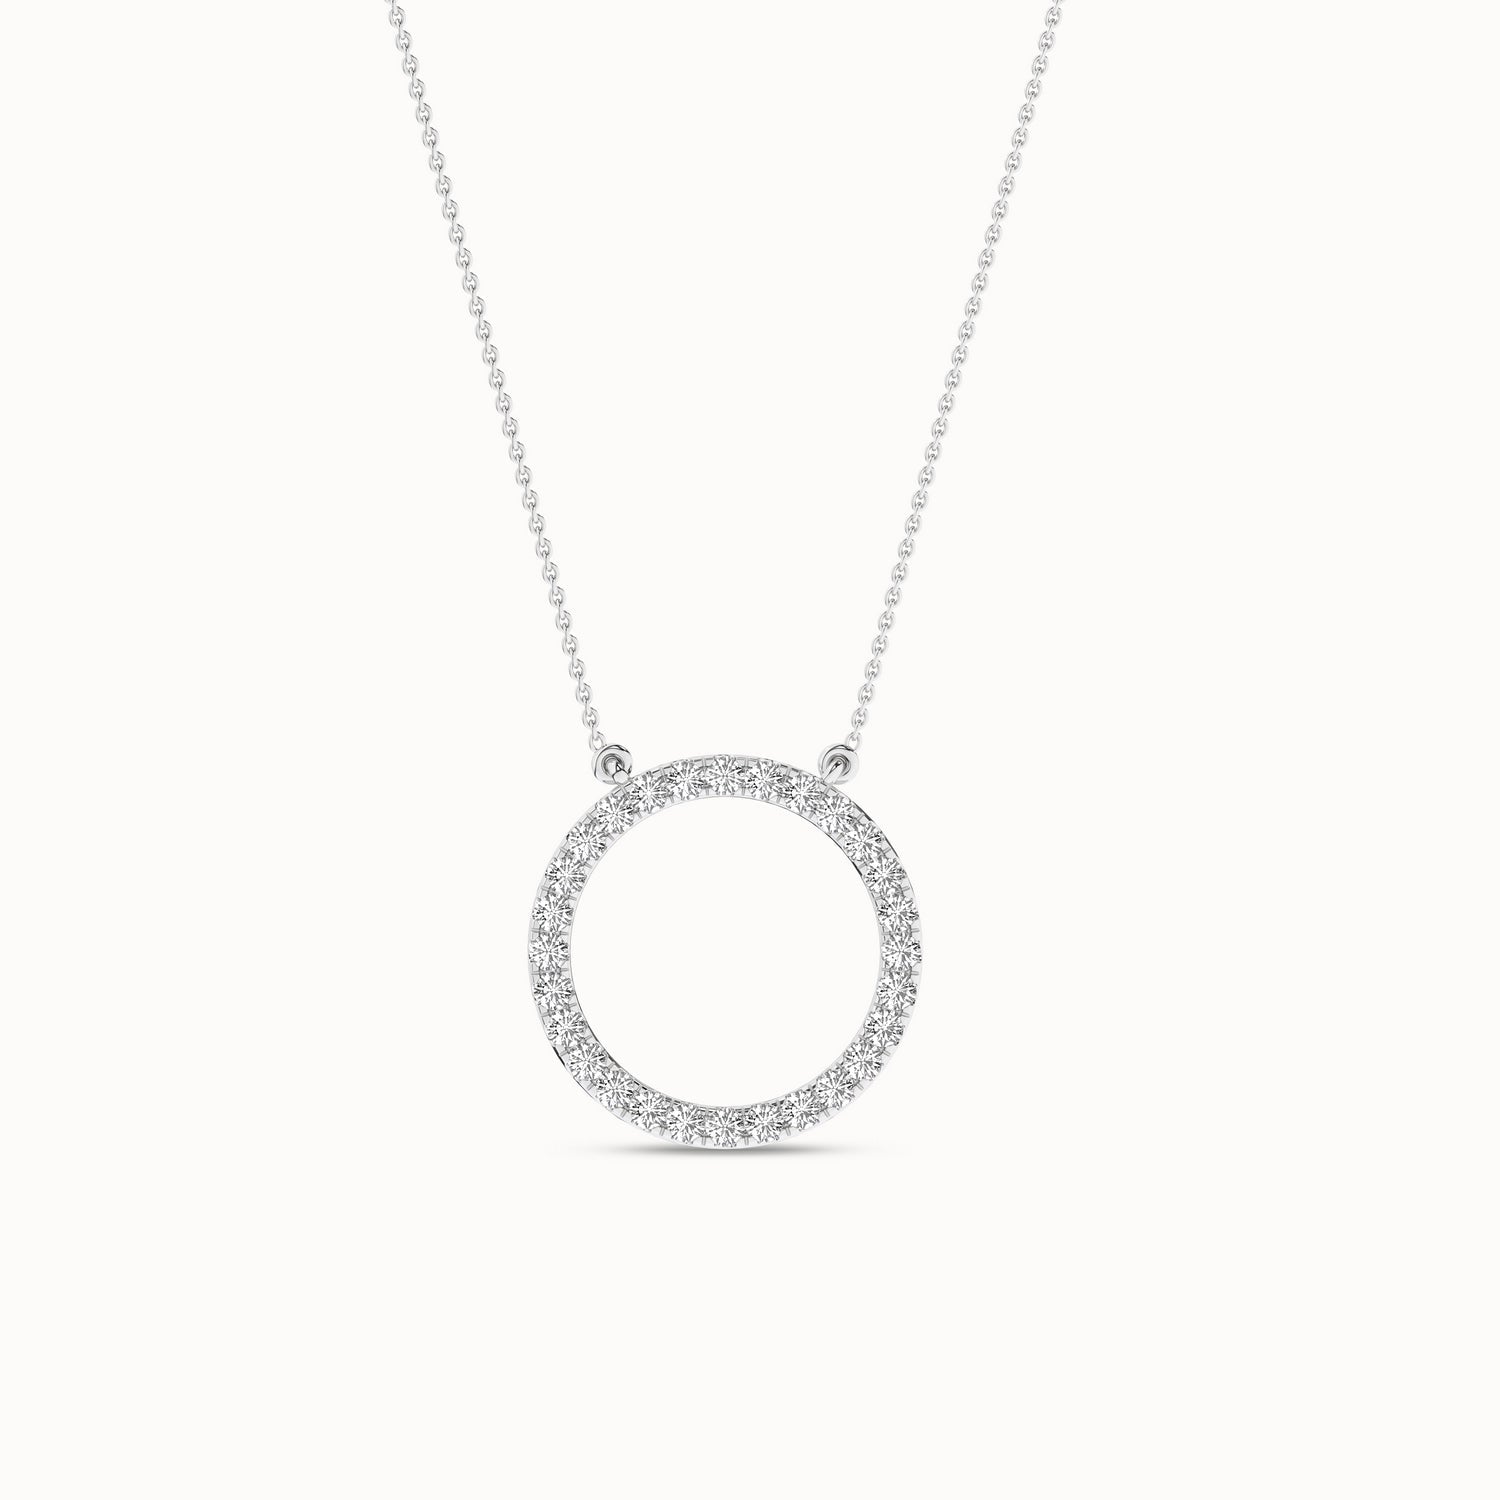 Circular Silhouette Necklace_Product Angle_1/2Ct. - 1